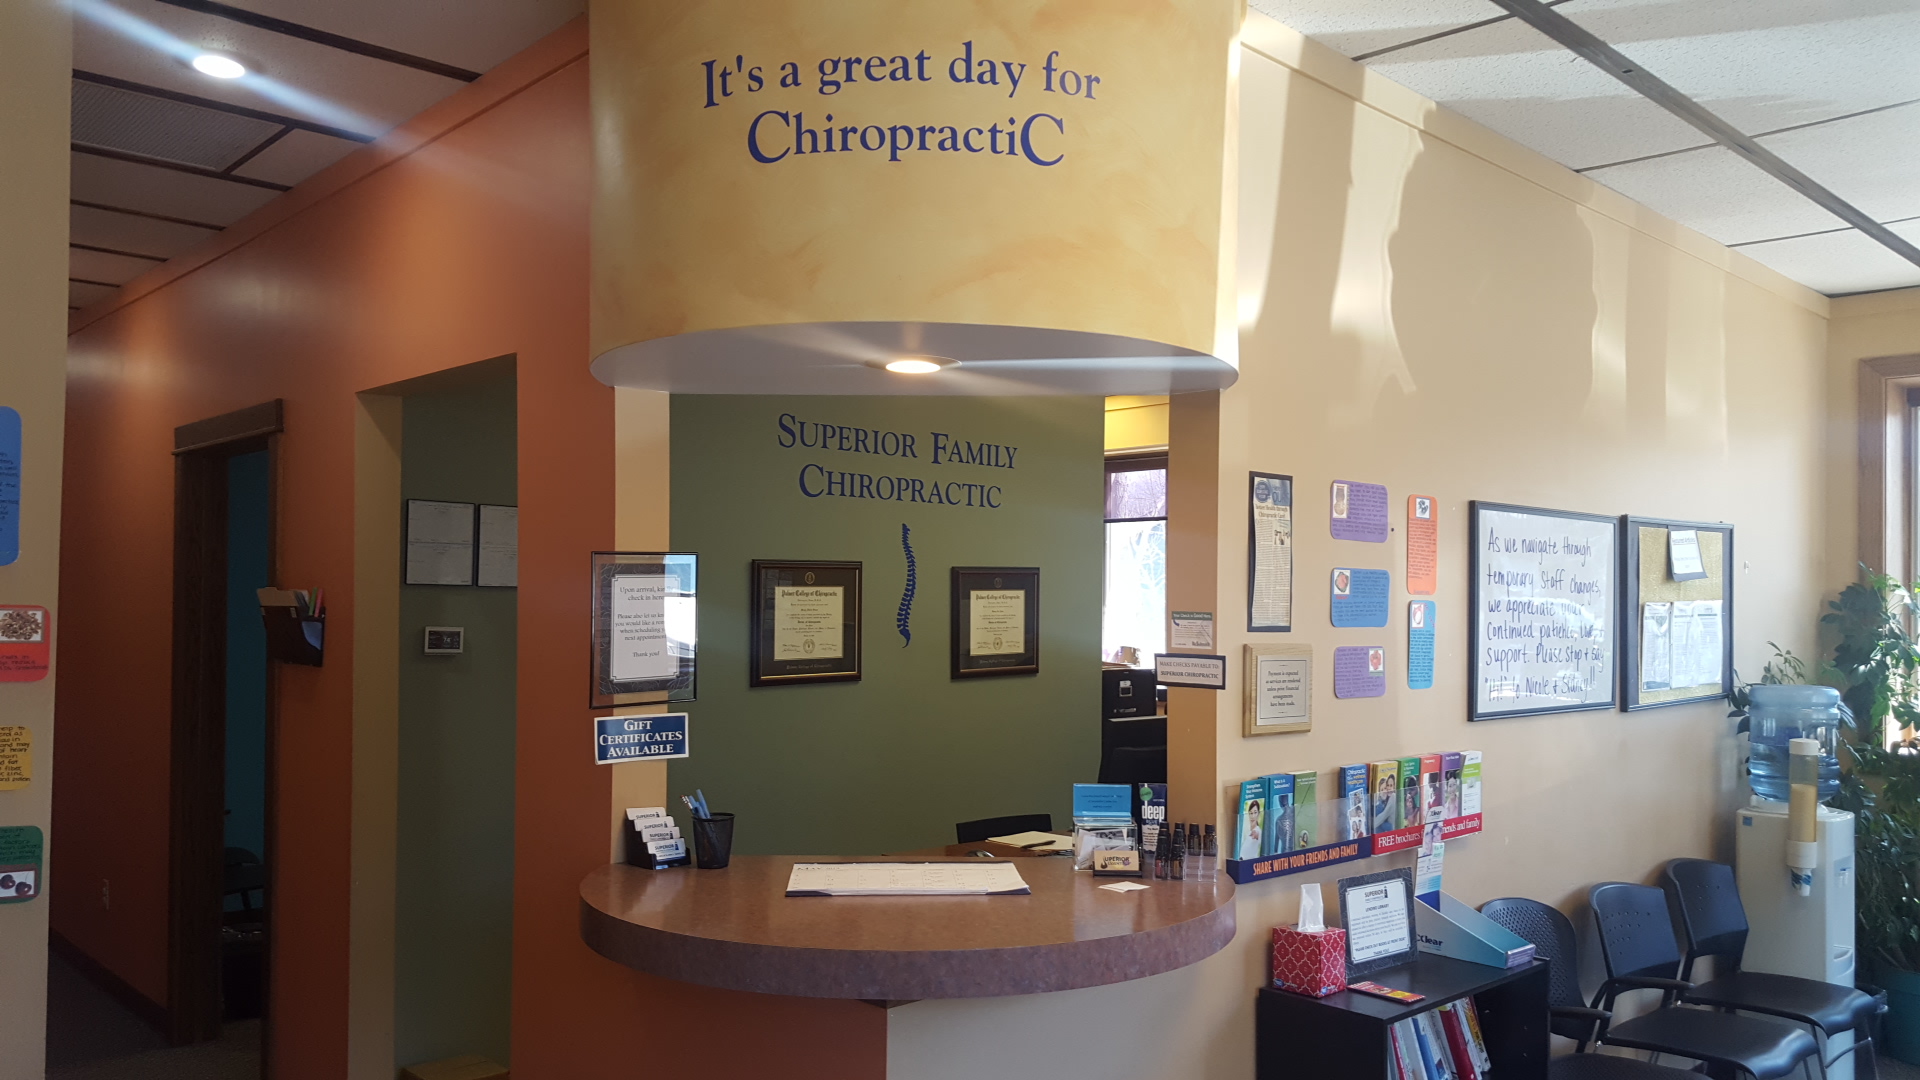 Superior Family Chiropractic 41950 Wilson Memorial Dr, Chassell Michigan 49916